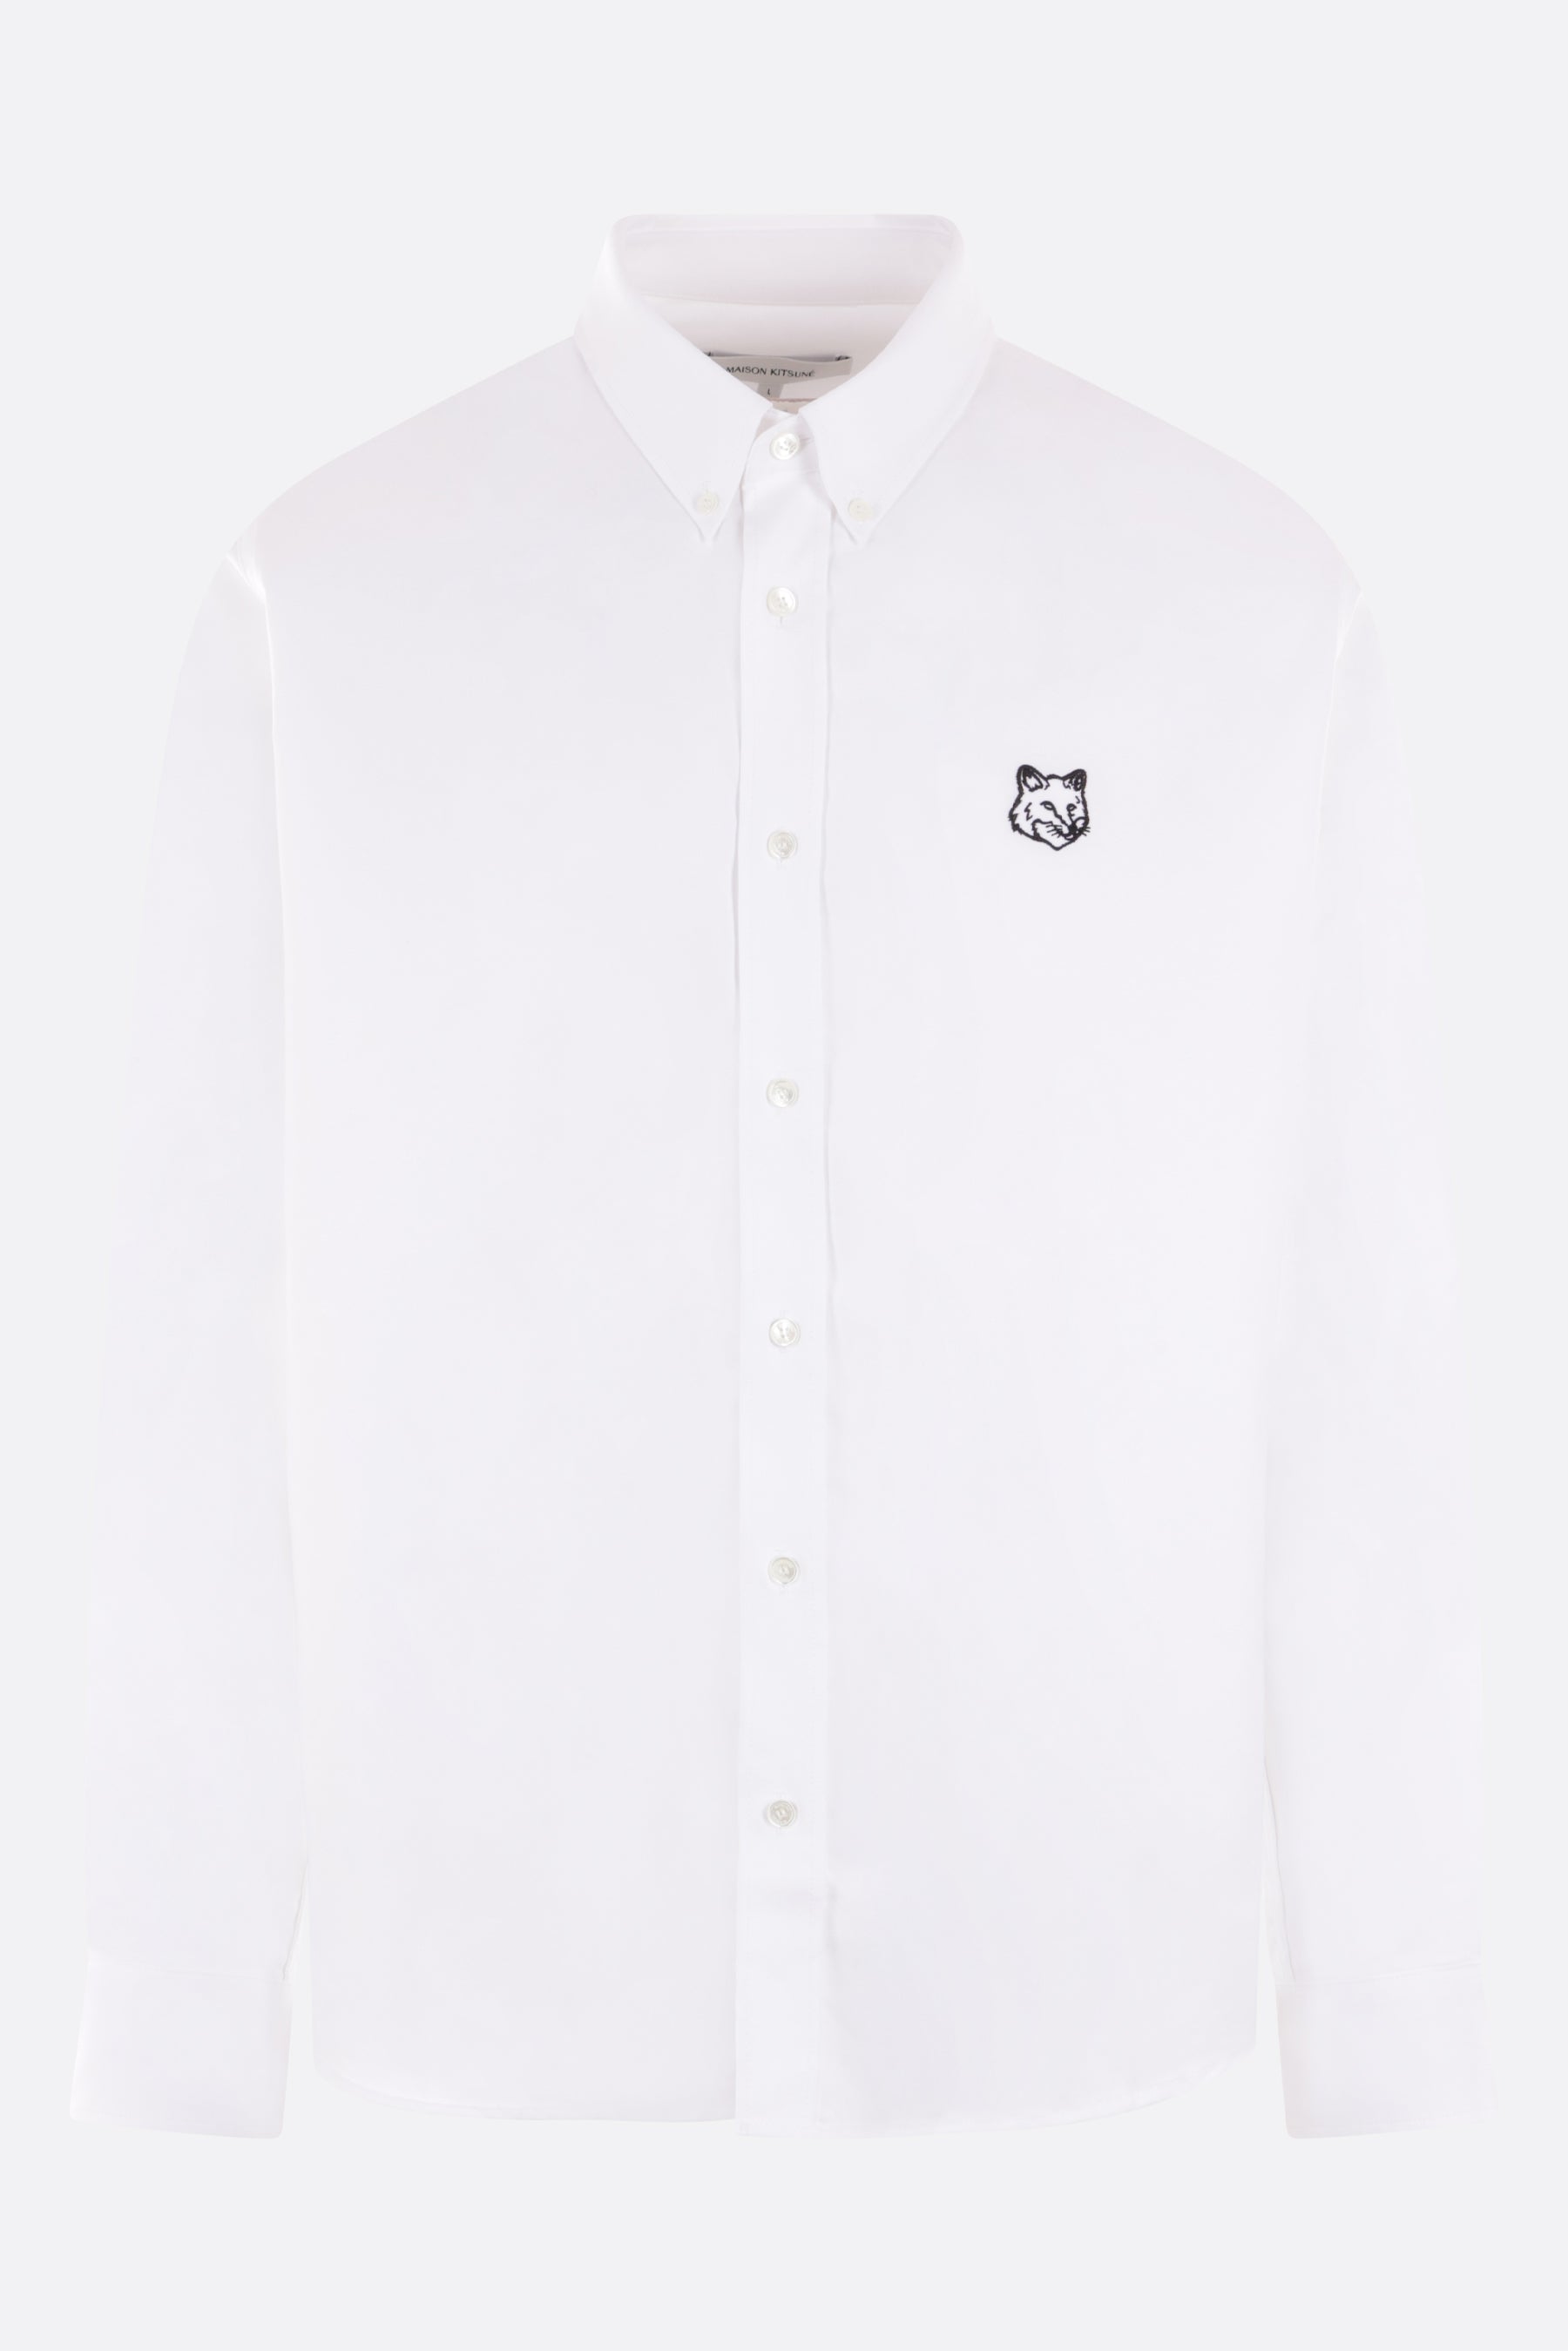 Oxford shirt with Contour Fox Head logo embroidery